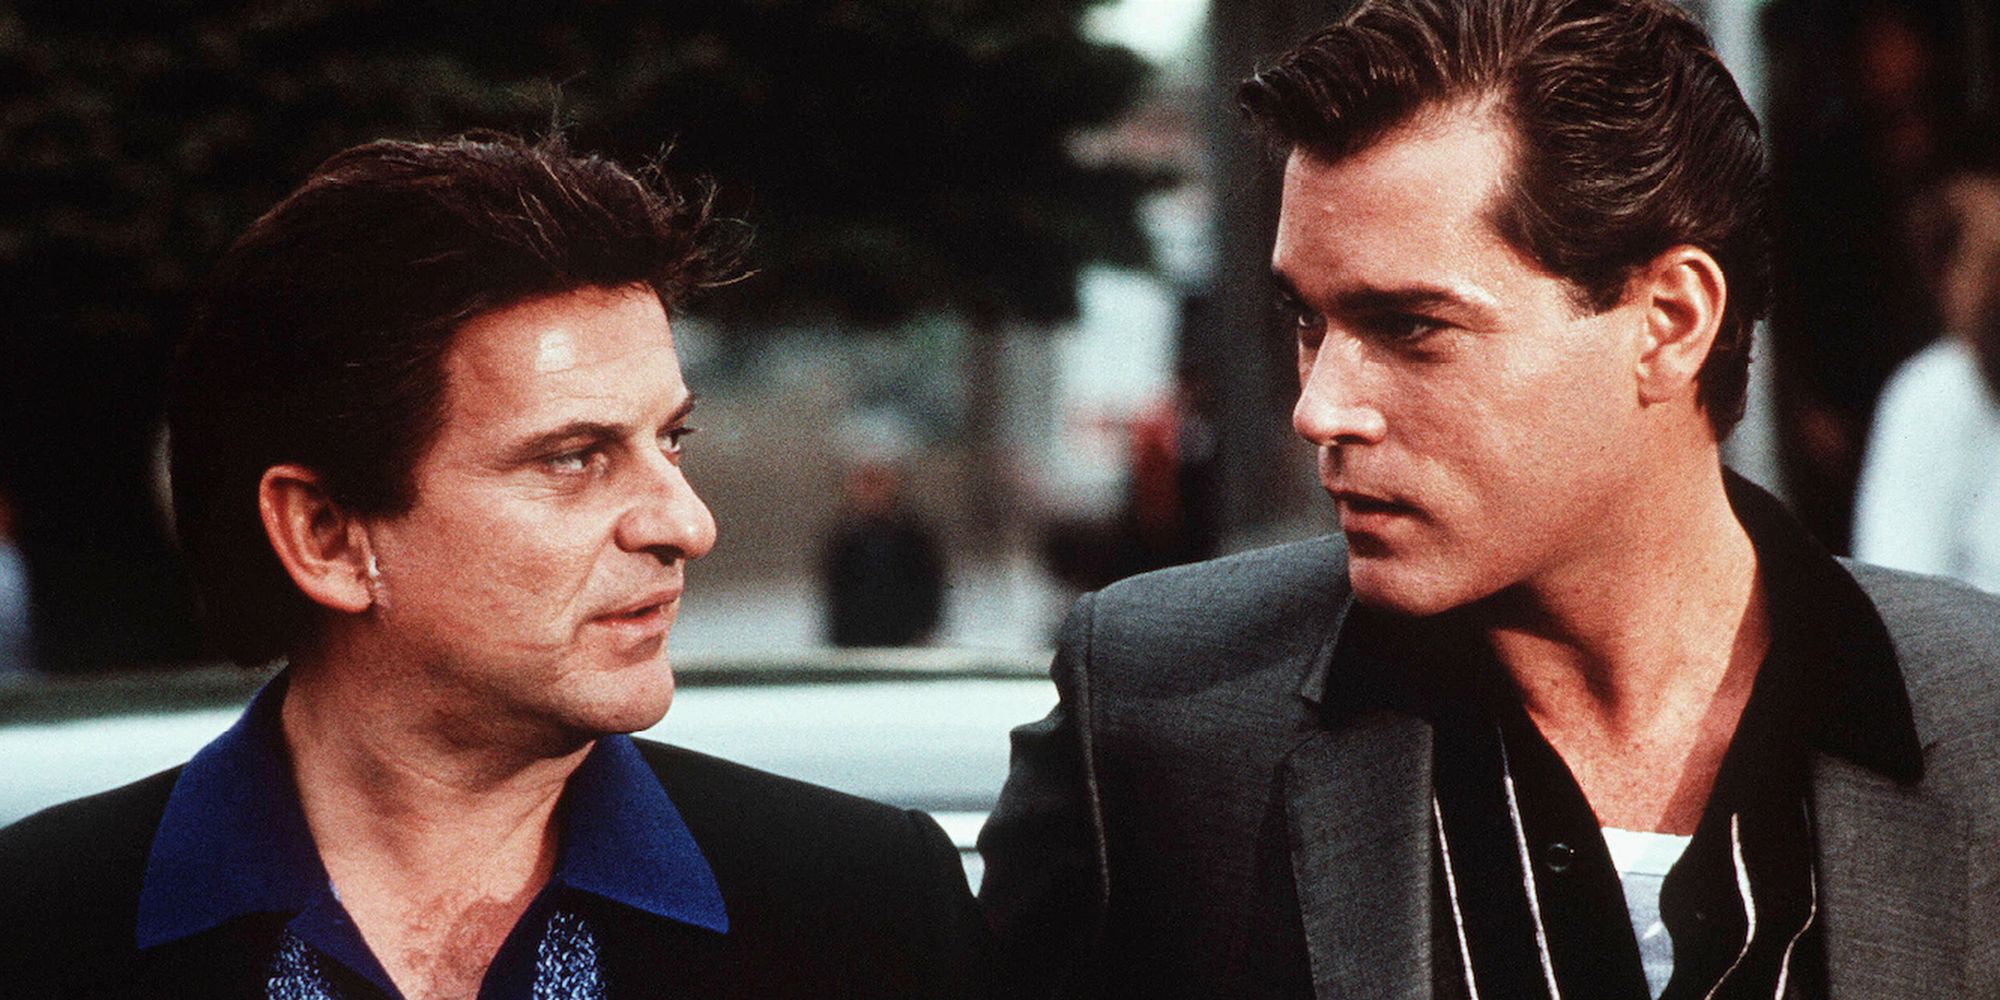 Joe Pesci and Ray Liotta as Tommy DeVito and Henry Hill in 'Goodfellas'